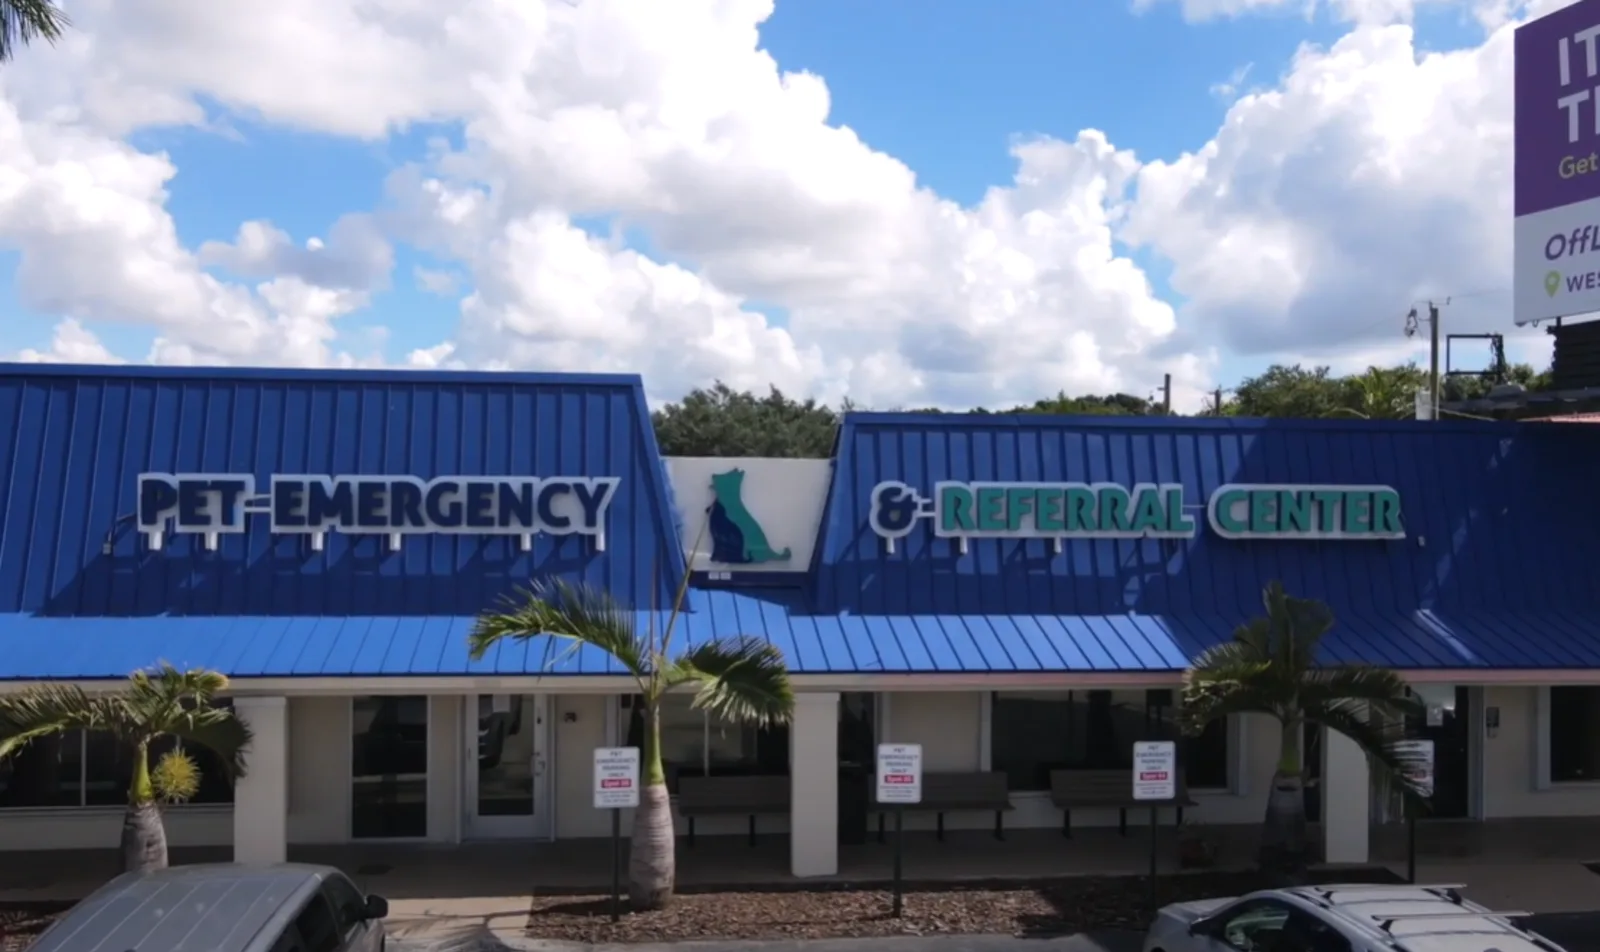 Surgery at Pet Emergency & Referral Center video image of the parking lot view of Pet Emergency & Referral Center